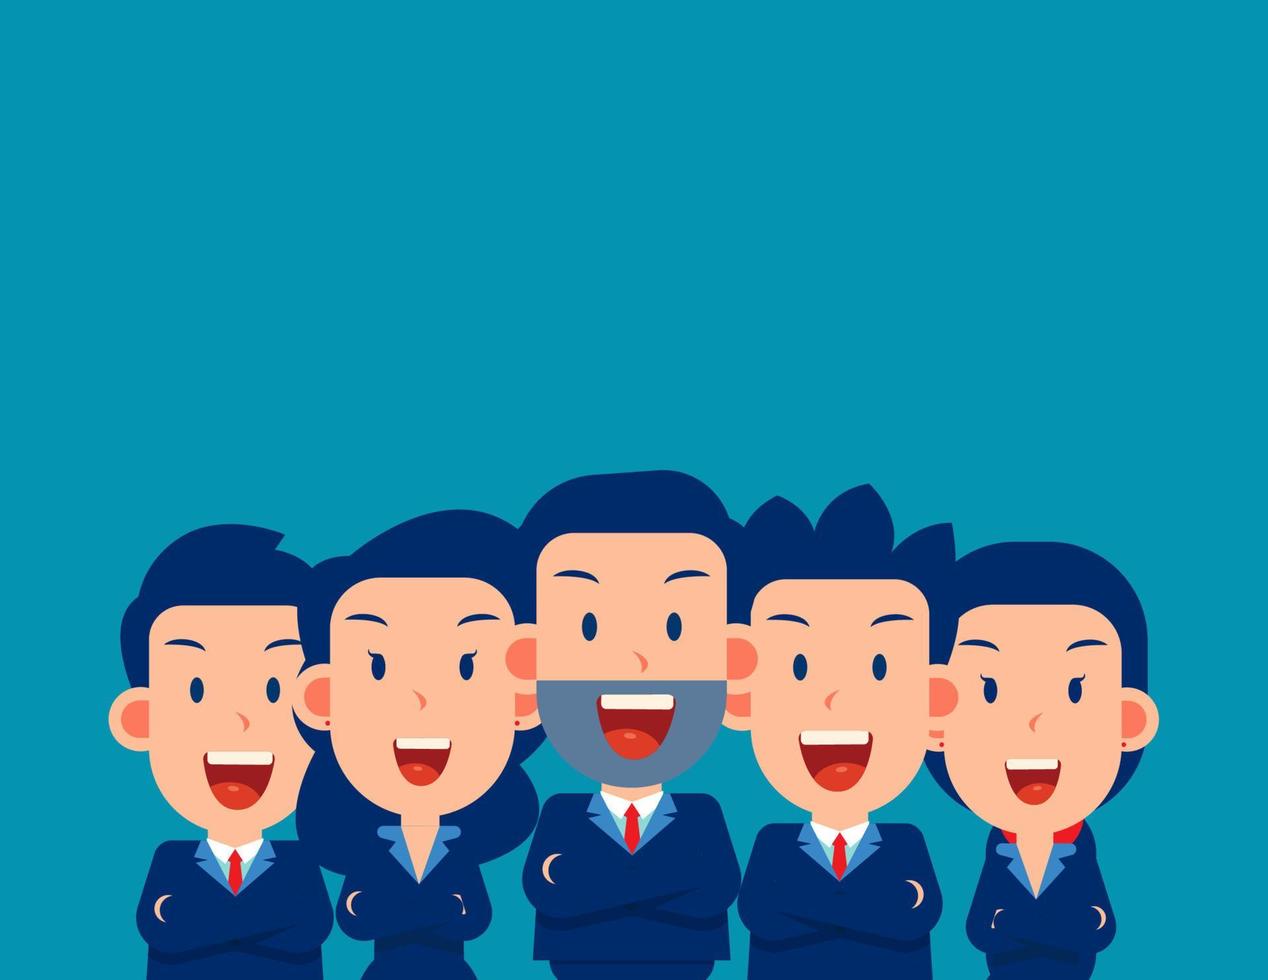 Business and office employees. Business team concept. Vector illustration in cartoon style